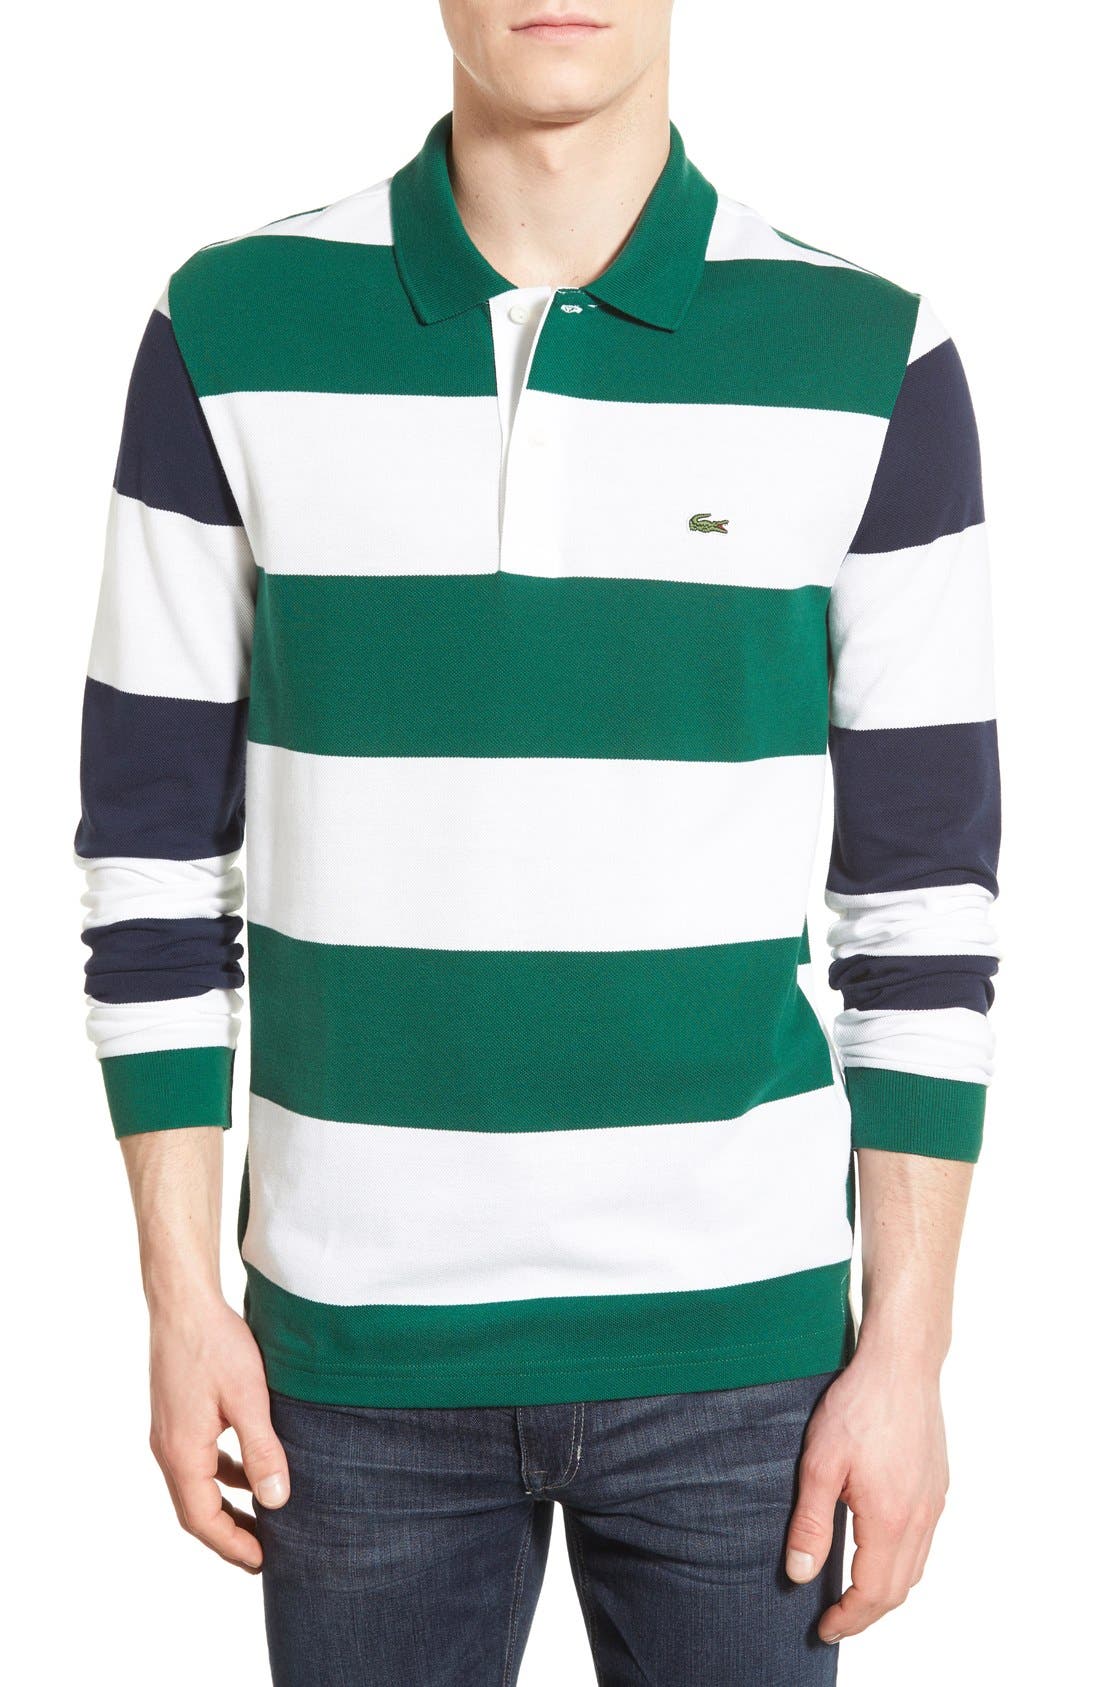 lacoste long sleeve striped polo